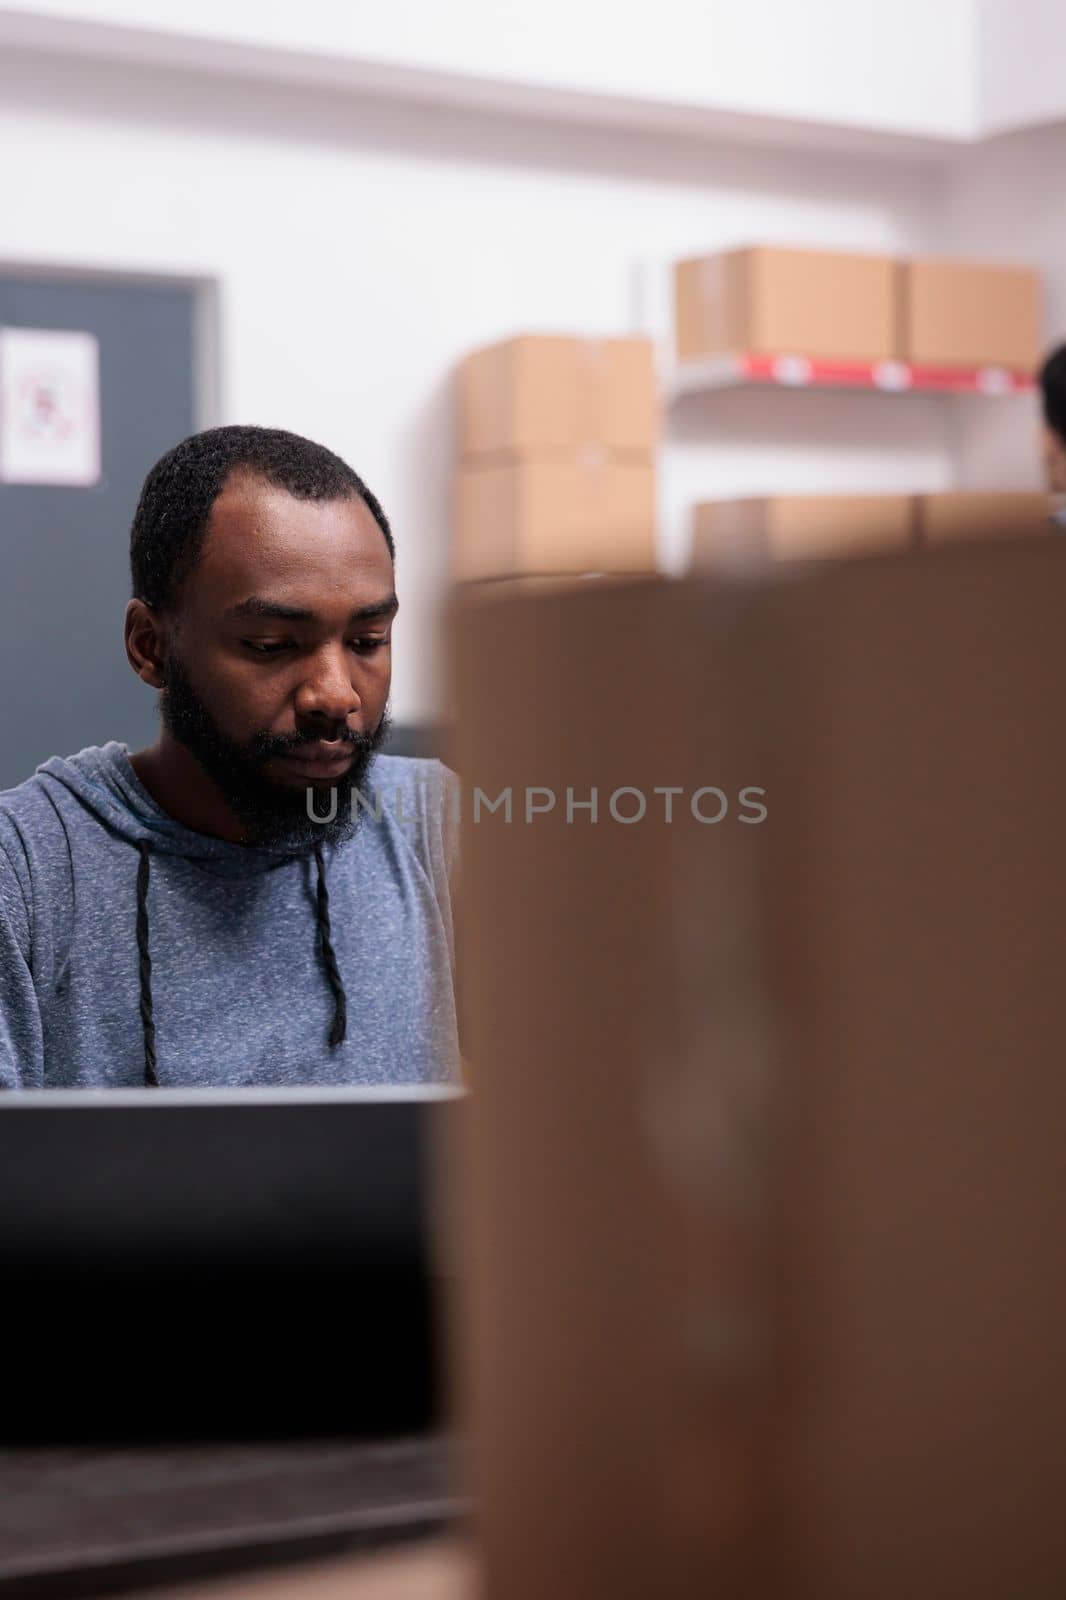 Storehouse manager checking shipment logistics before start preparing packages, putting customer order in carton boxes. African american supervisor working in warehouse delivery department